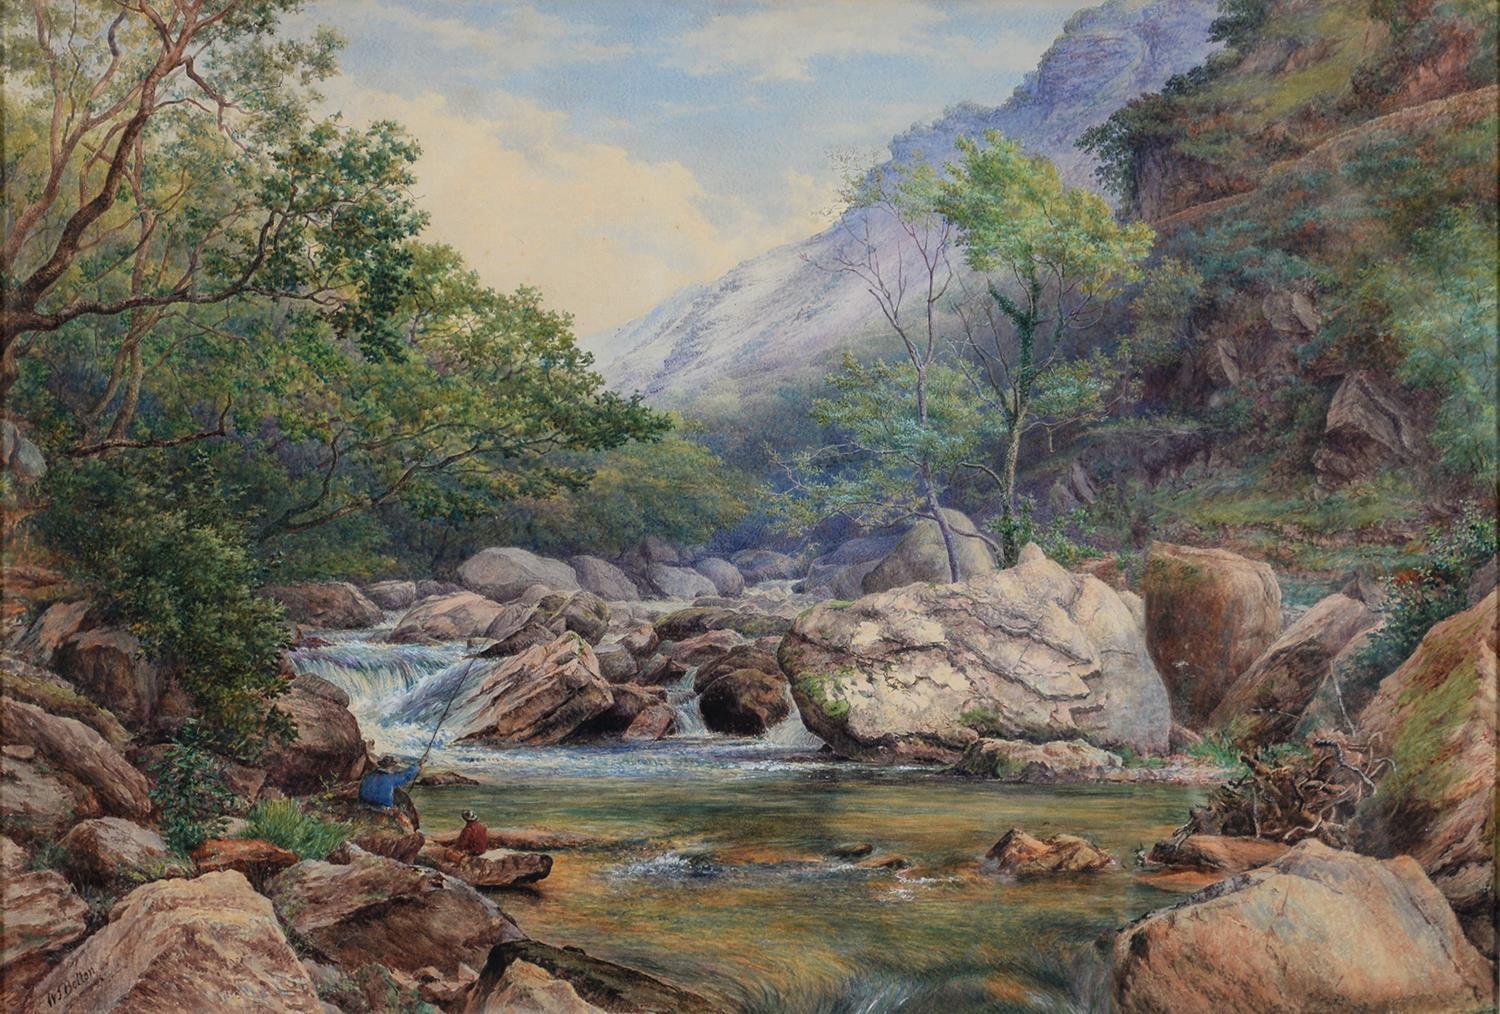 WILLIAM TREACHER BOLTON (1816-1884) -ANGLERS FISHING ON A MOUNTAIN STREAM, SIGNED, WATERCOLOUR, 44 X